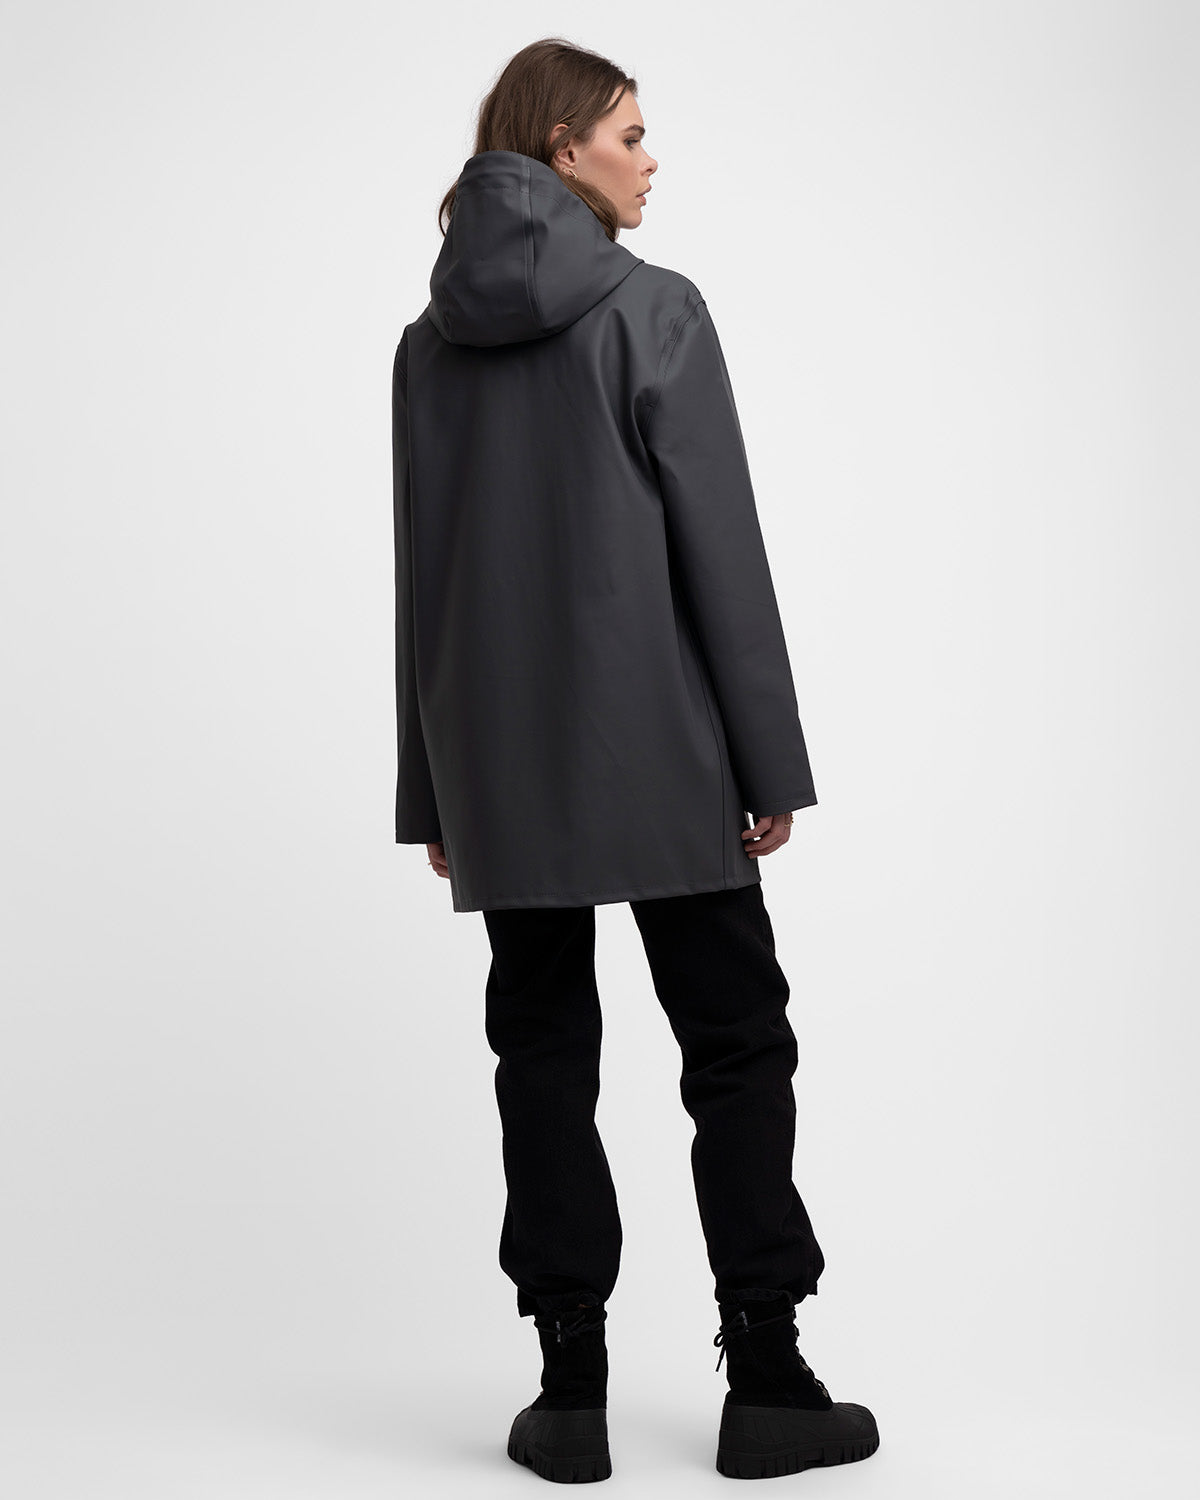 A woman with a Raincoat in color charcoal by Stutterheim